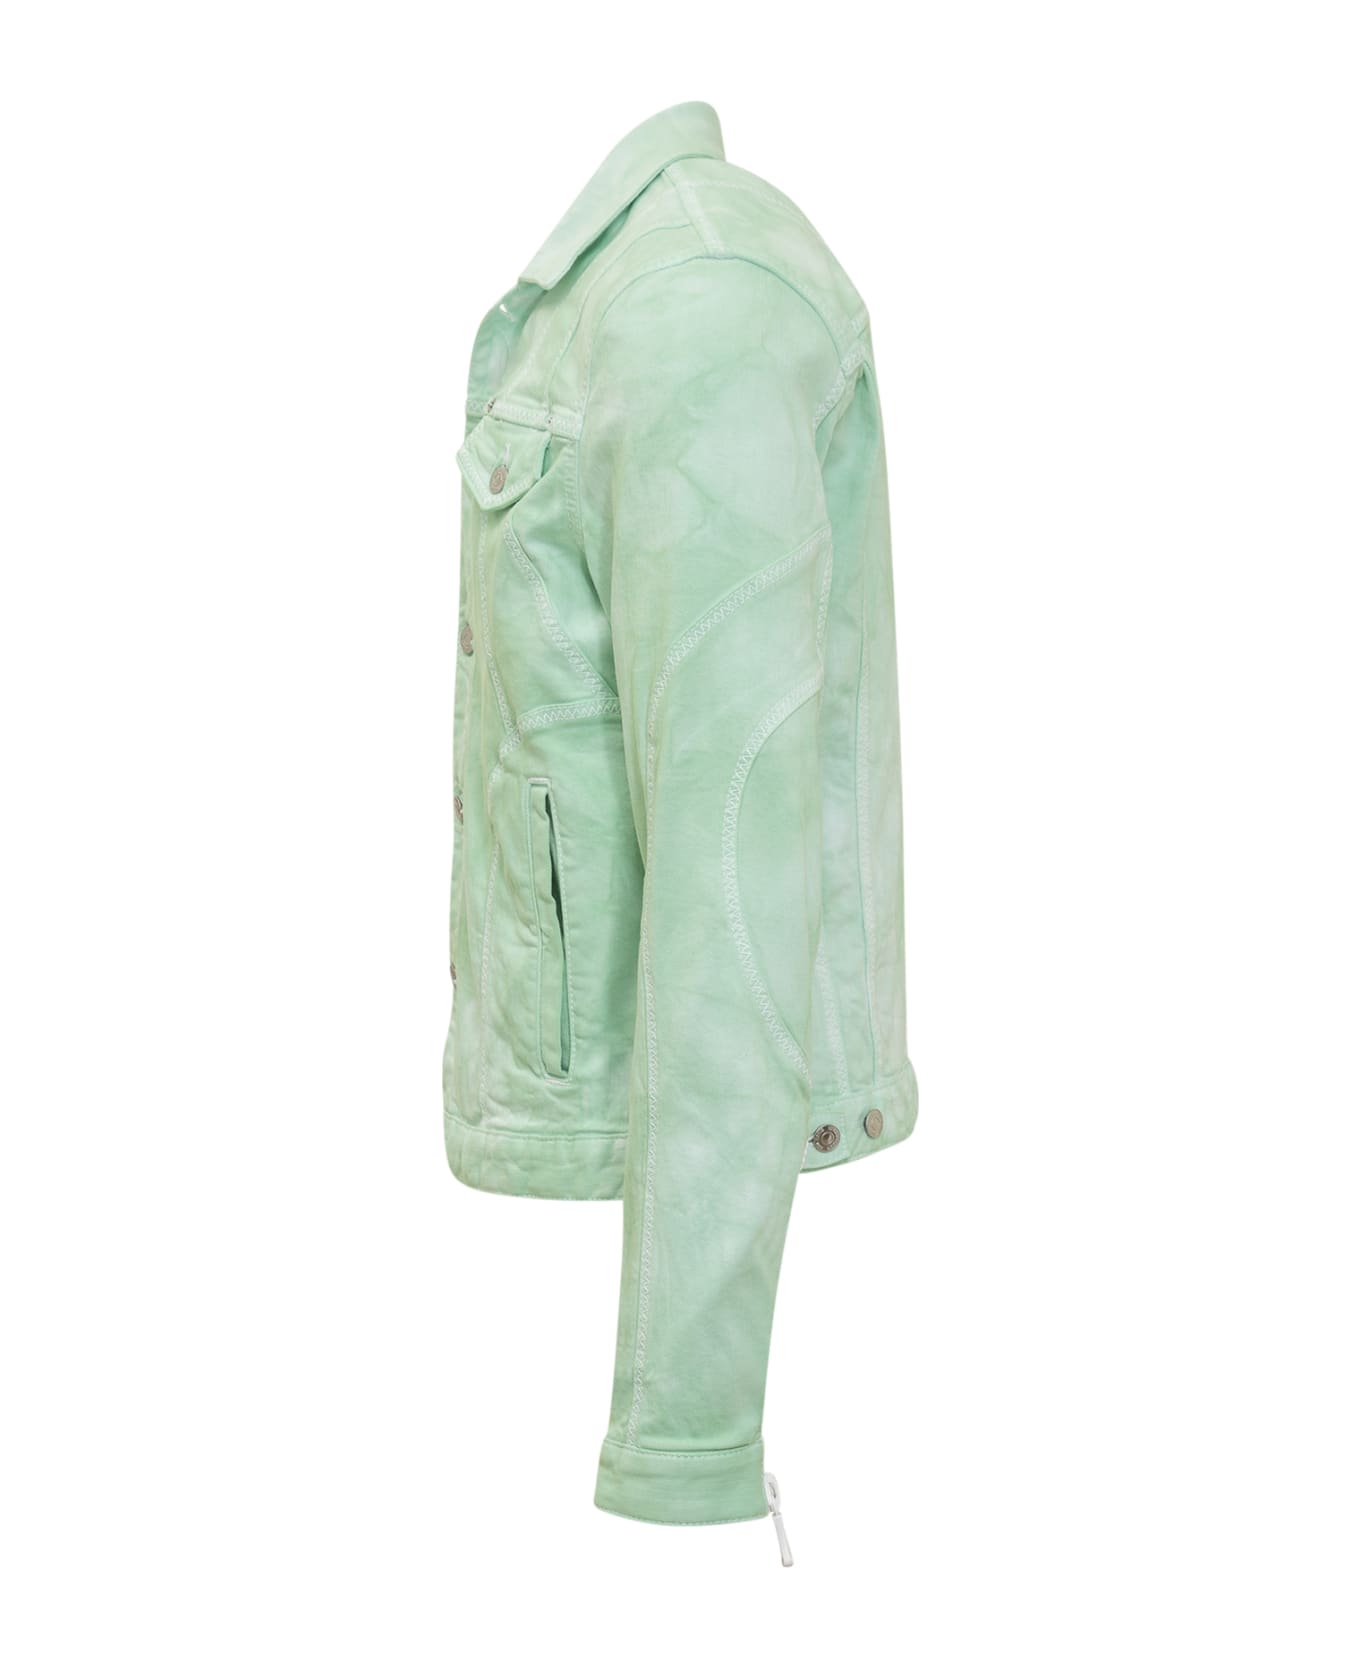 Dsquared2 Cassic Jean Jacket - GREEN